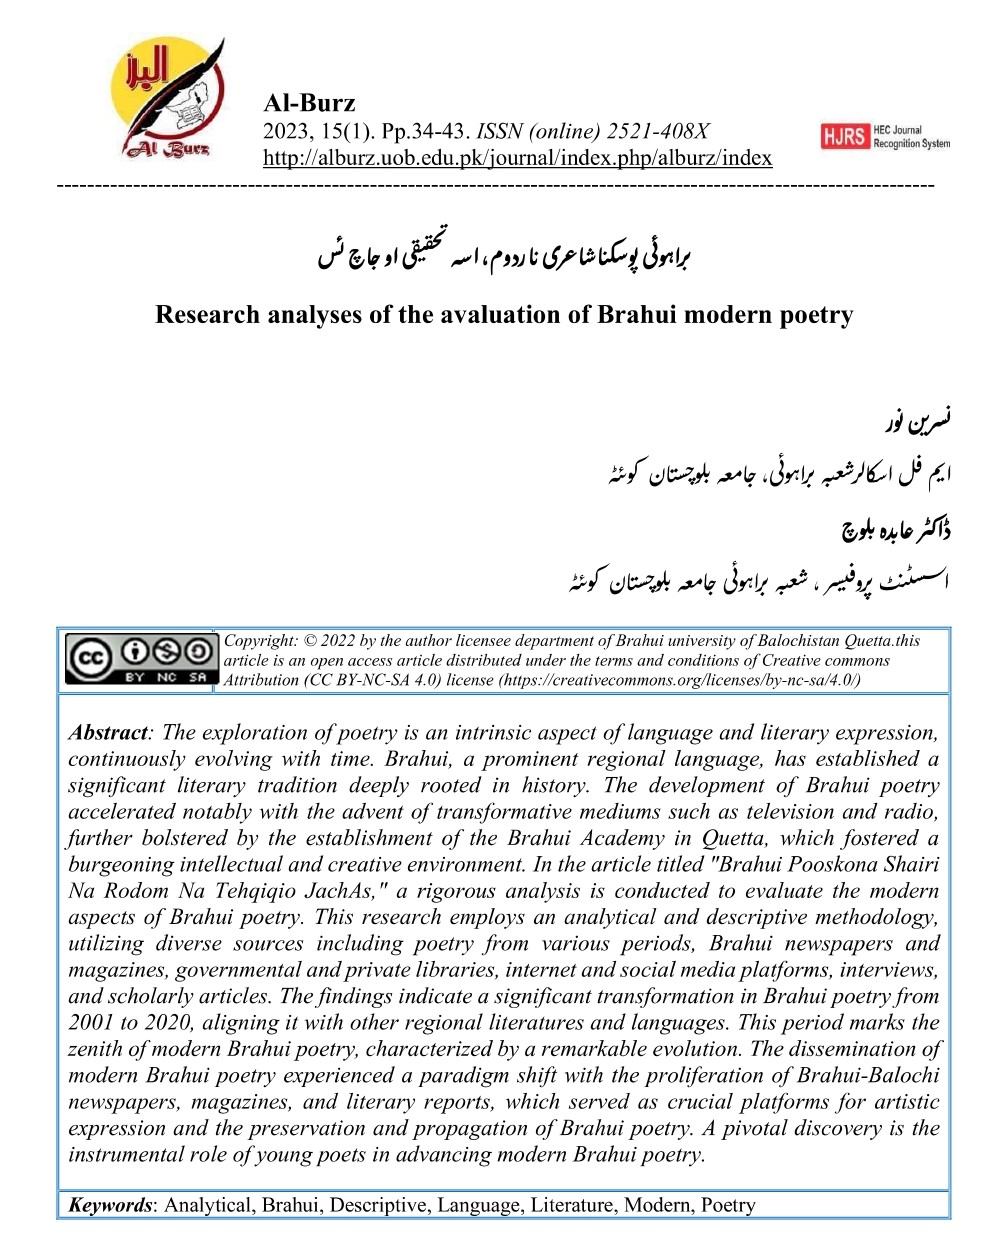 Research analyses of the avaluation of Brahui modern poetry